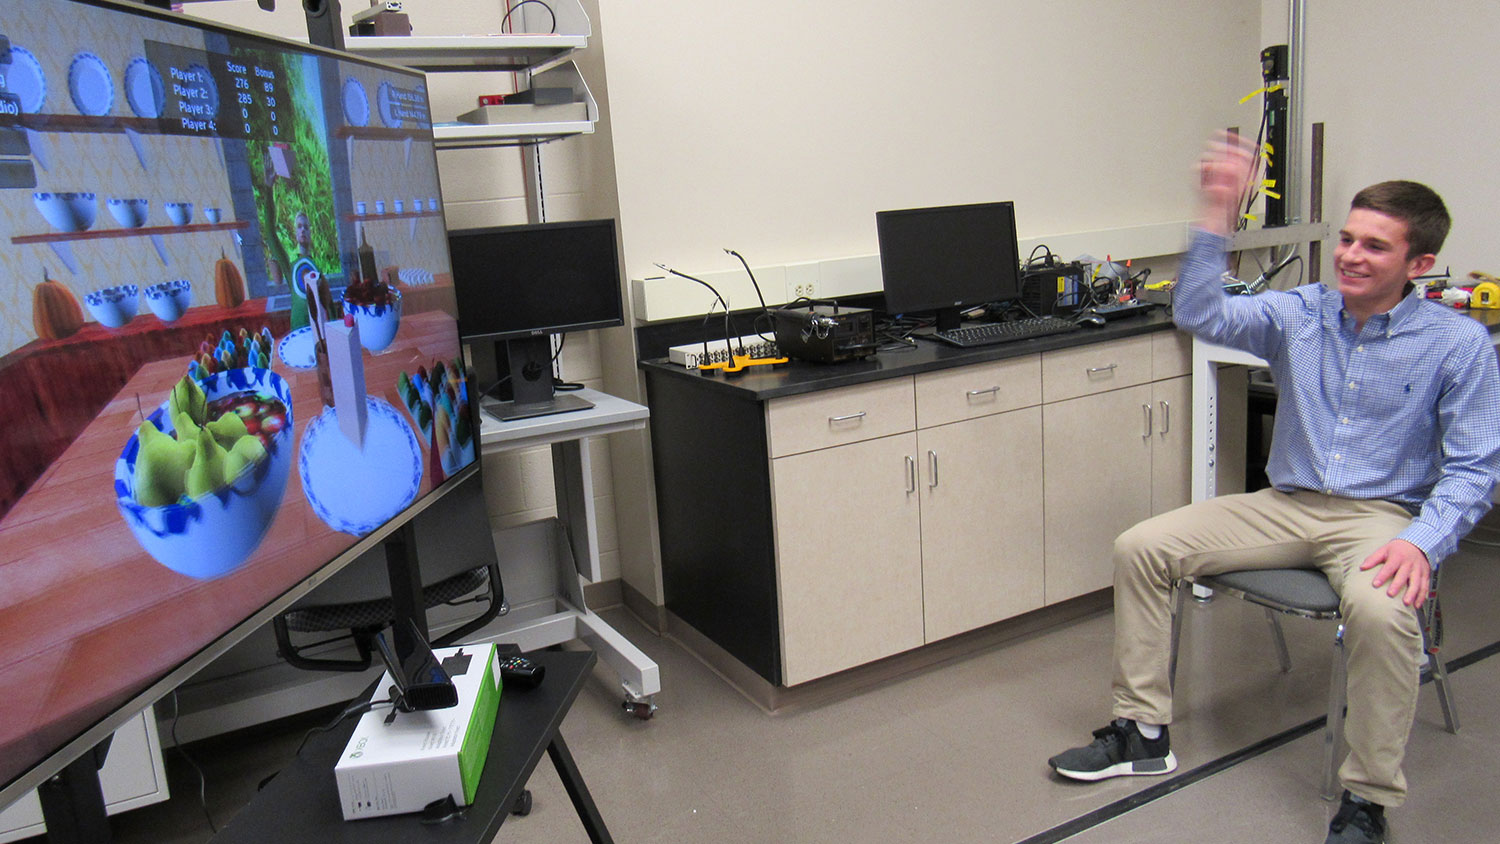 Student participates in a virtual reality activity in the HRL lab.